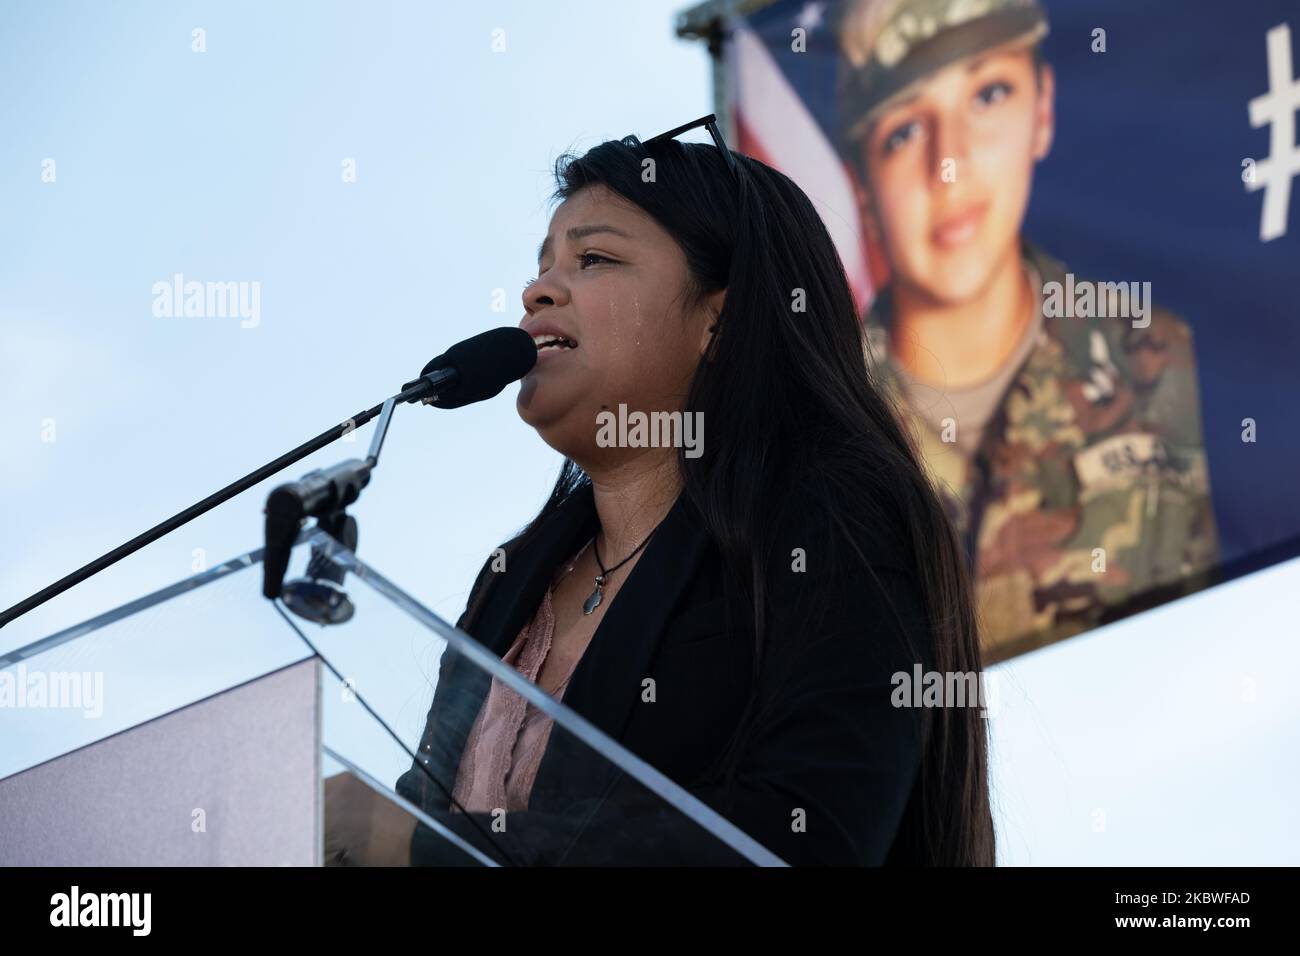 U.S. Army Private First Class Vanessa Guillen's sister Lupe Guillen addresses supporters and calls for justice in Vanessa's death during a rally on the National Mall in front of the U.S. Capitol July 30, 2020 in Washington, DC. (Photo by Aurora Samperio/NurPhoto) Stock Photo